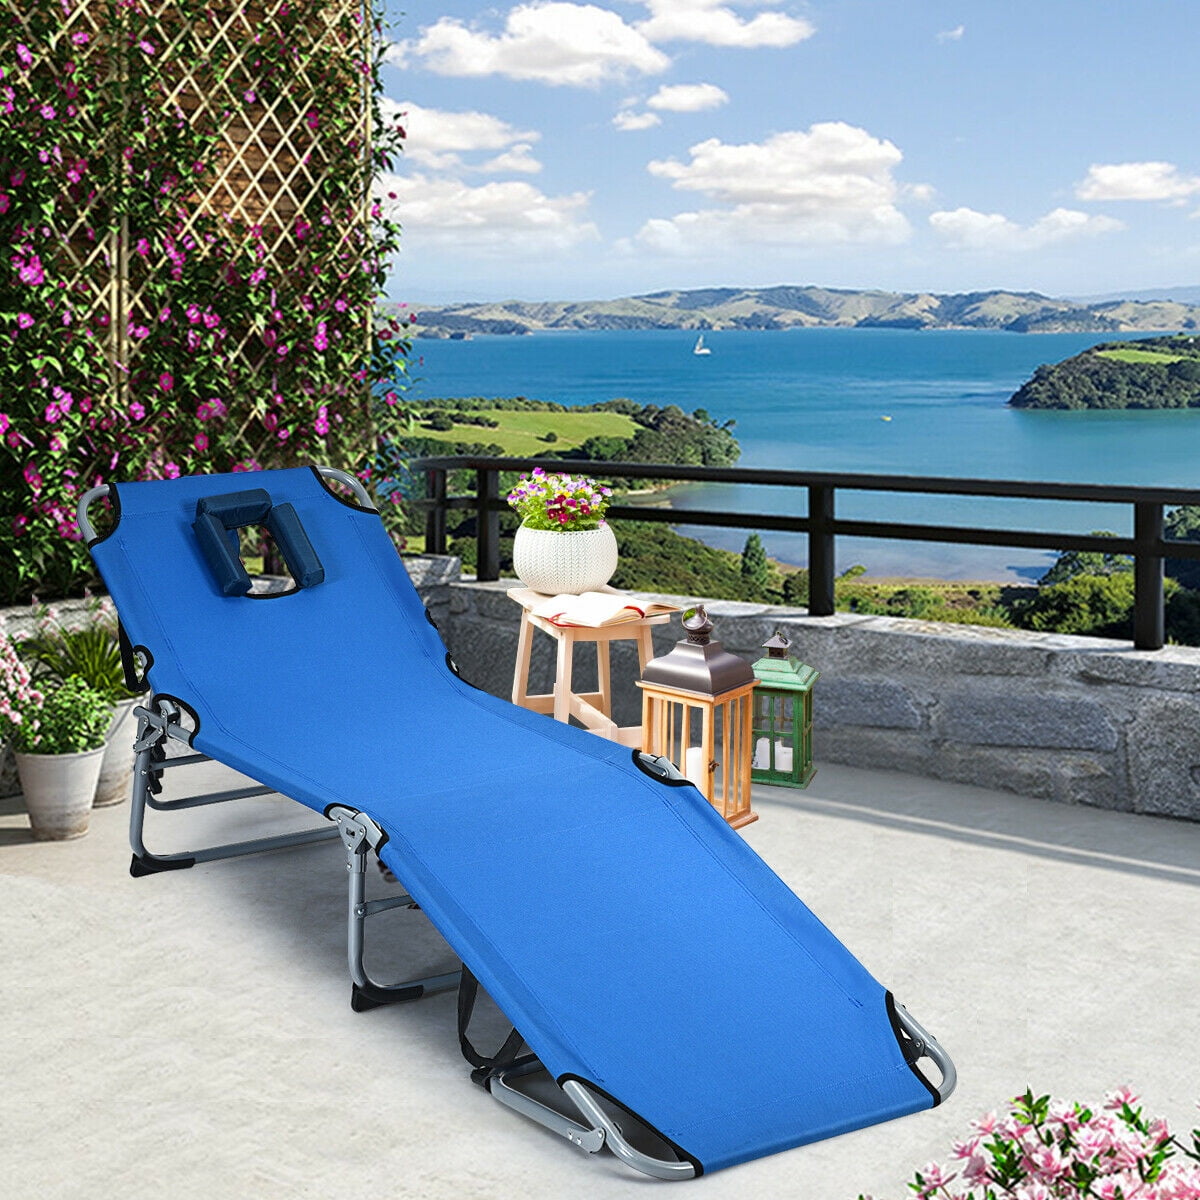 Gymax Folding Chaise Lounge Chair Bed Adjustable Outdoor Patio Beach